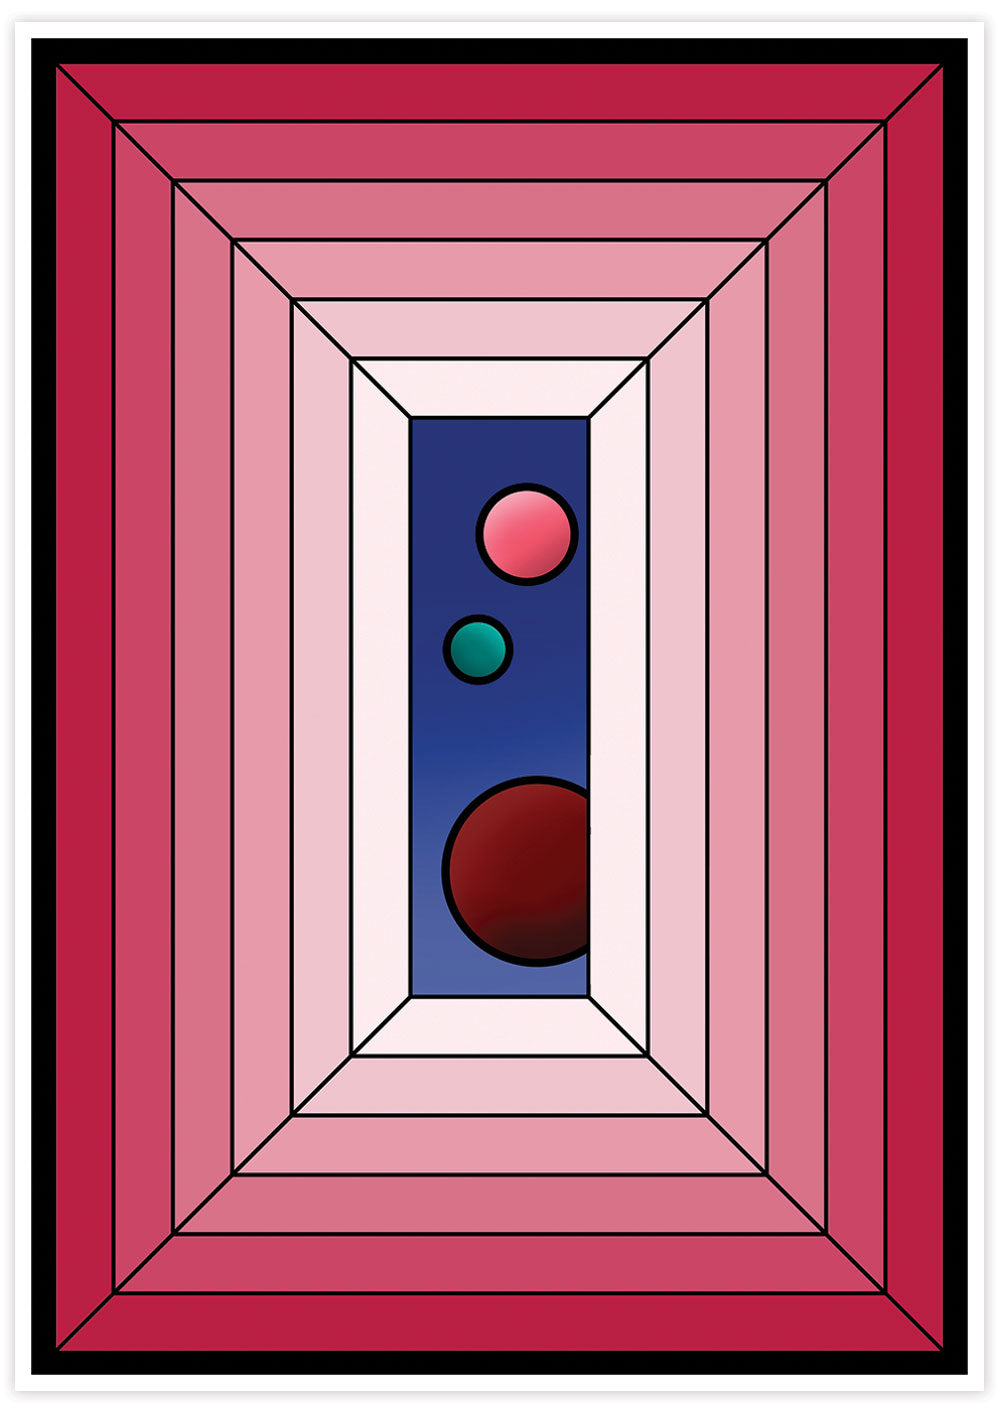 The Window Abstract Surreal Art not in a frame